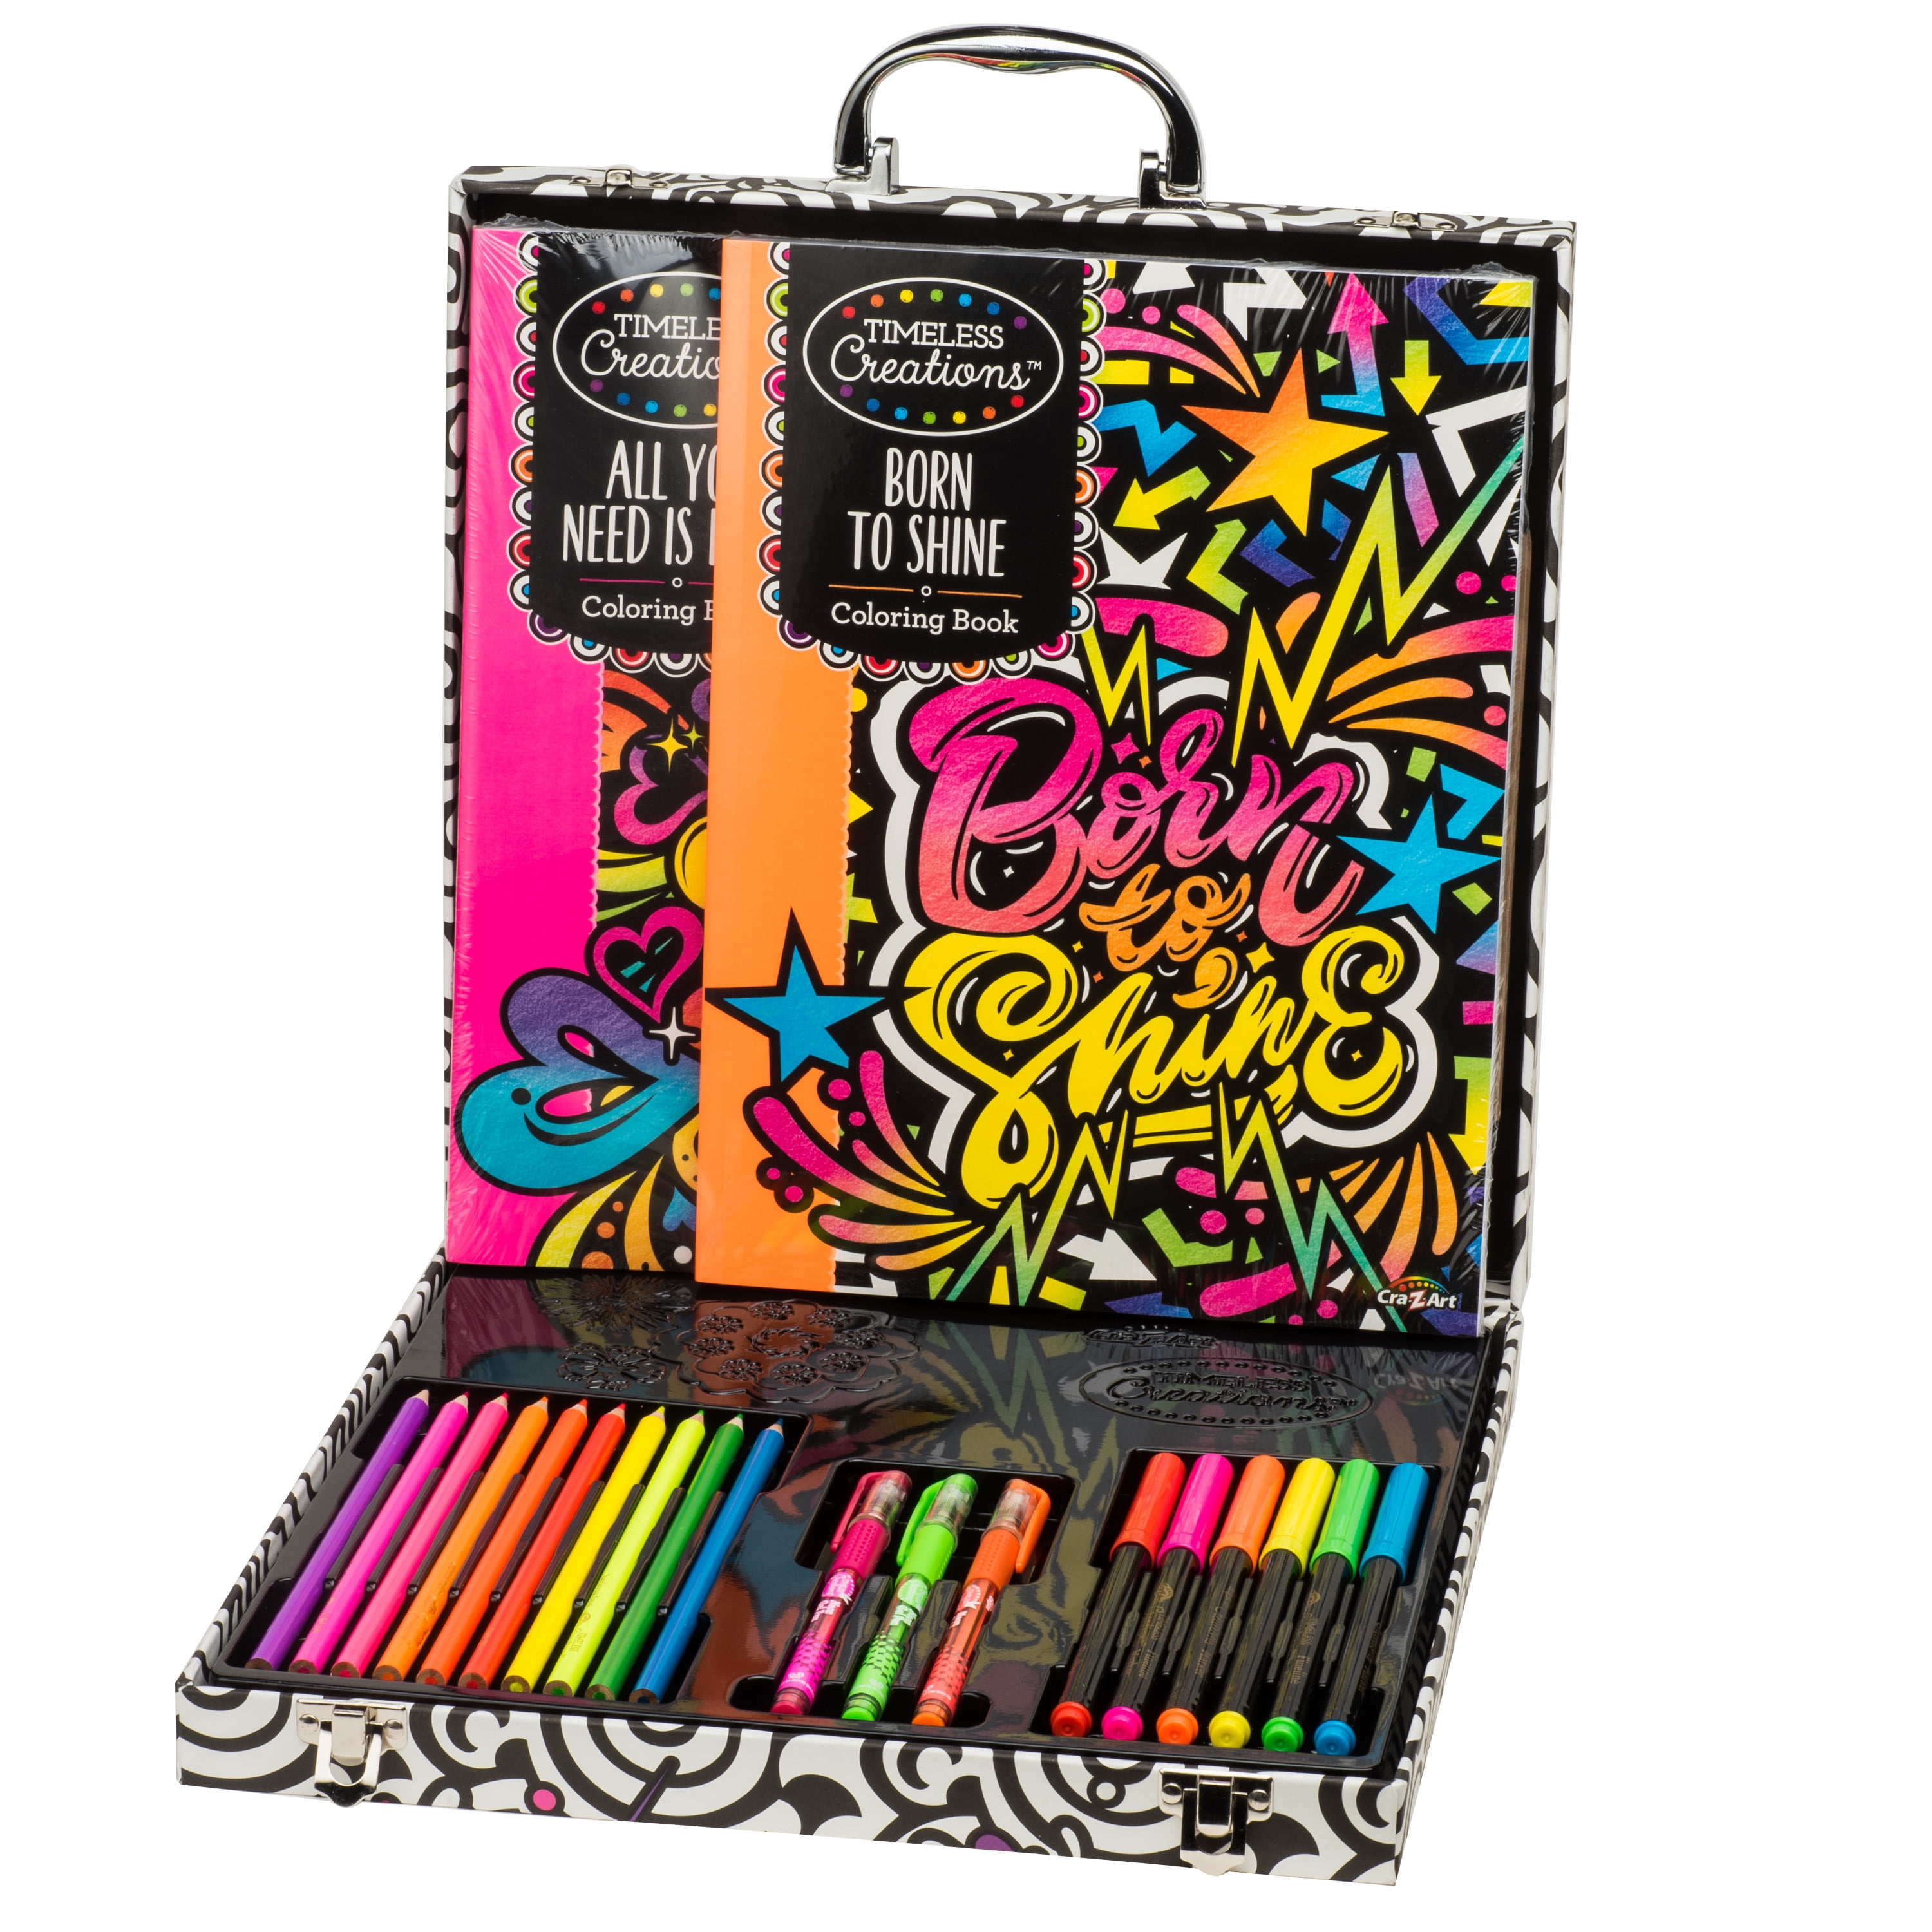  Timeless Creations 01-0817BBFDD000790A Cool Neon Coloring  Studio Art Case with 2 64-Page Coloring Books 22 pc